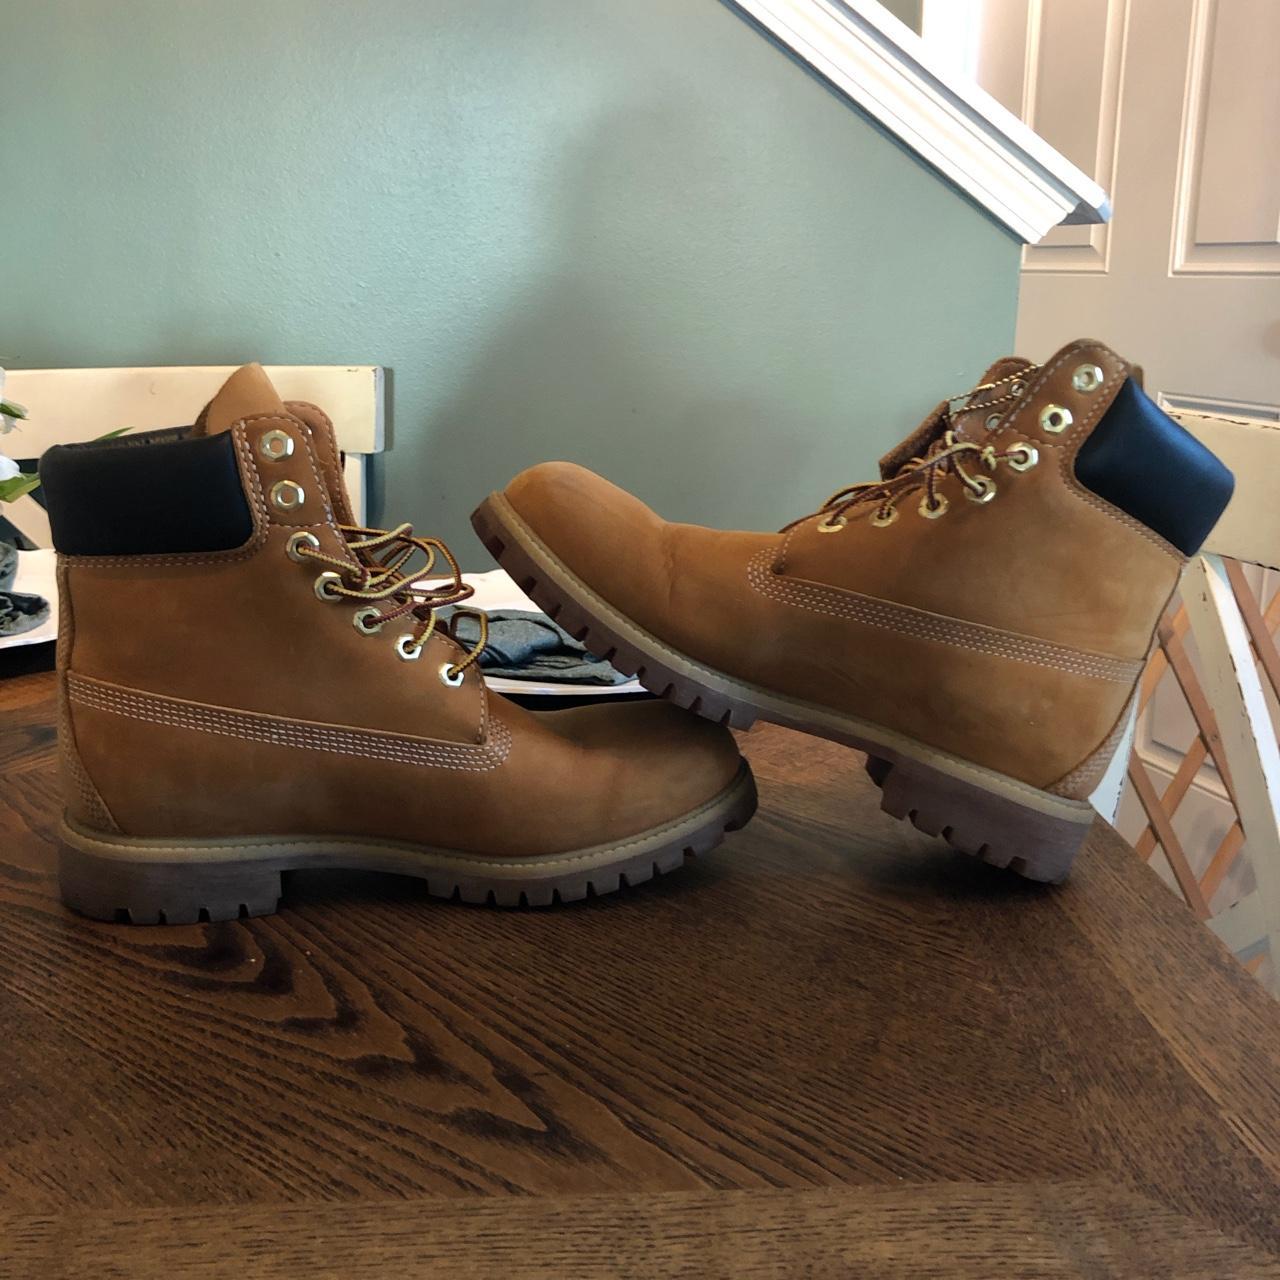 Timberland Men's Tan and Black Boots